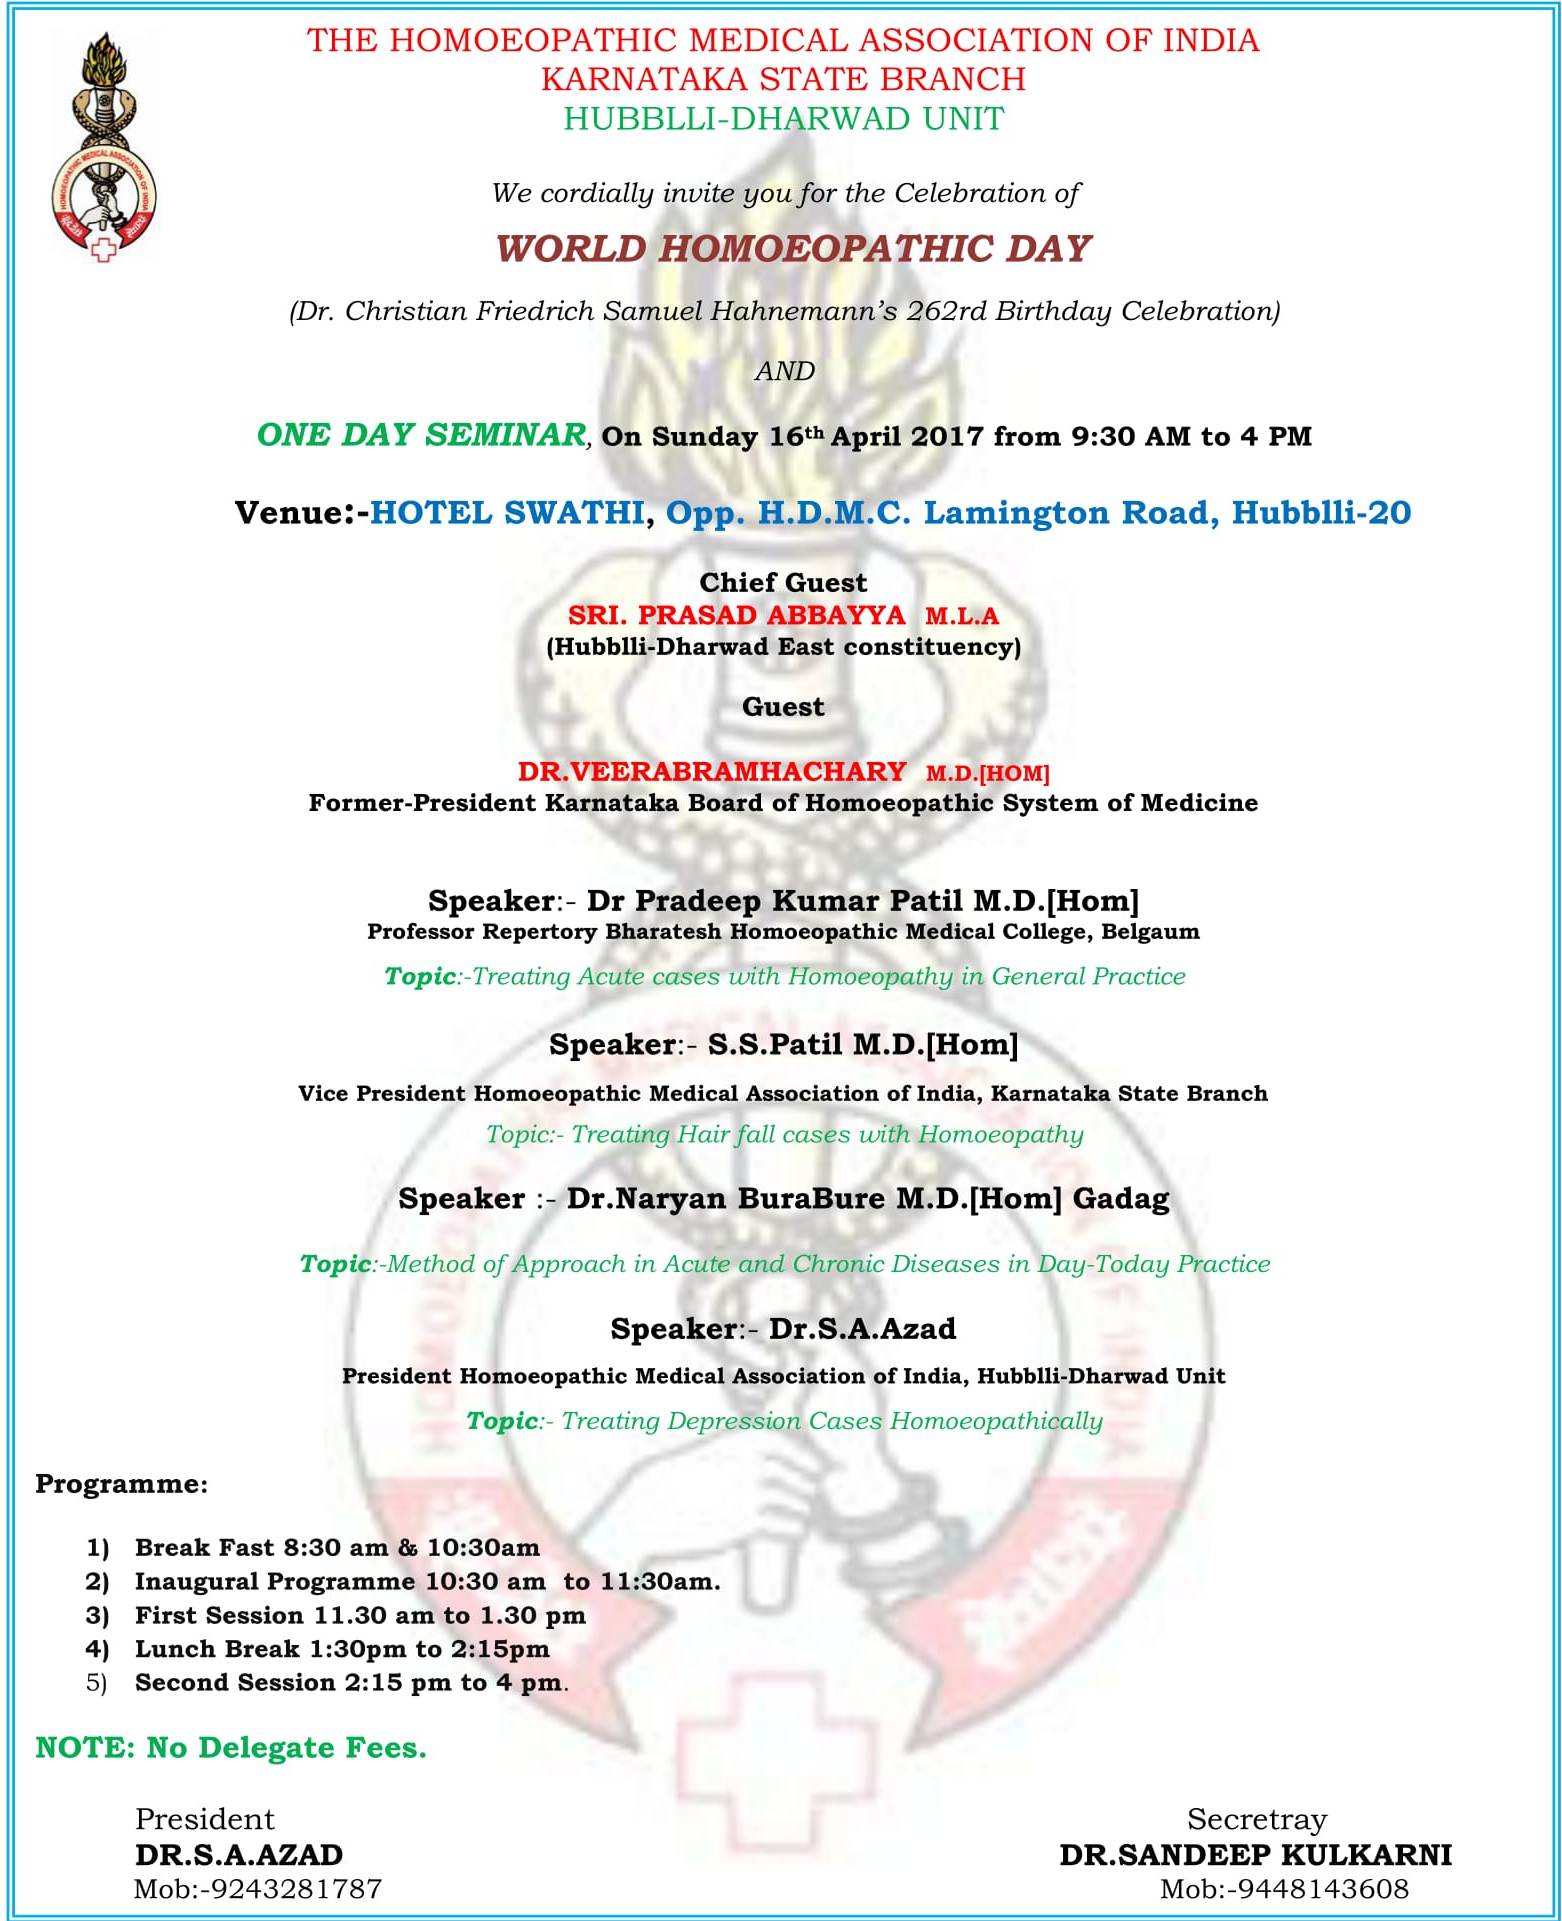 HMAI, Karnataka State will be going to conduct World Homoeopathic Day on 16 April 2017 